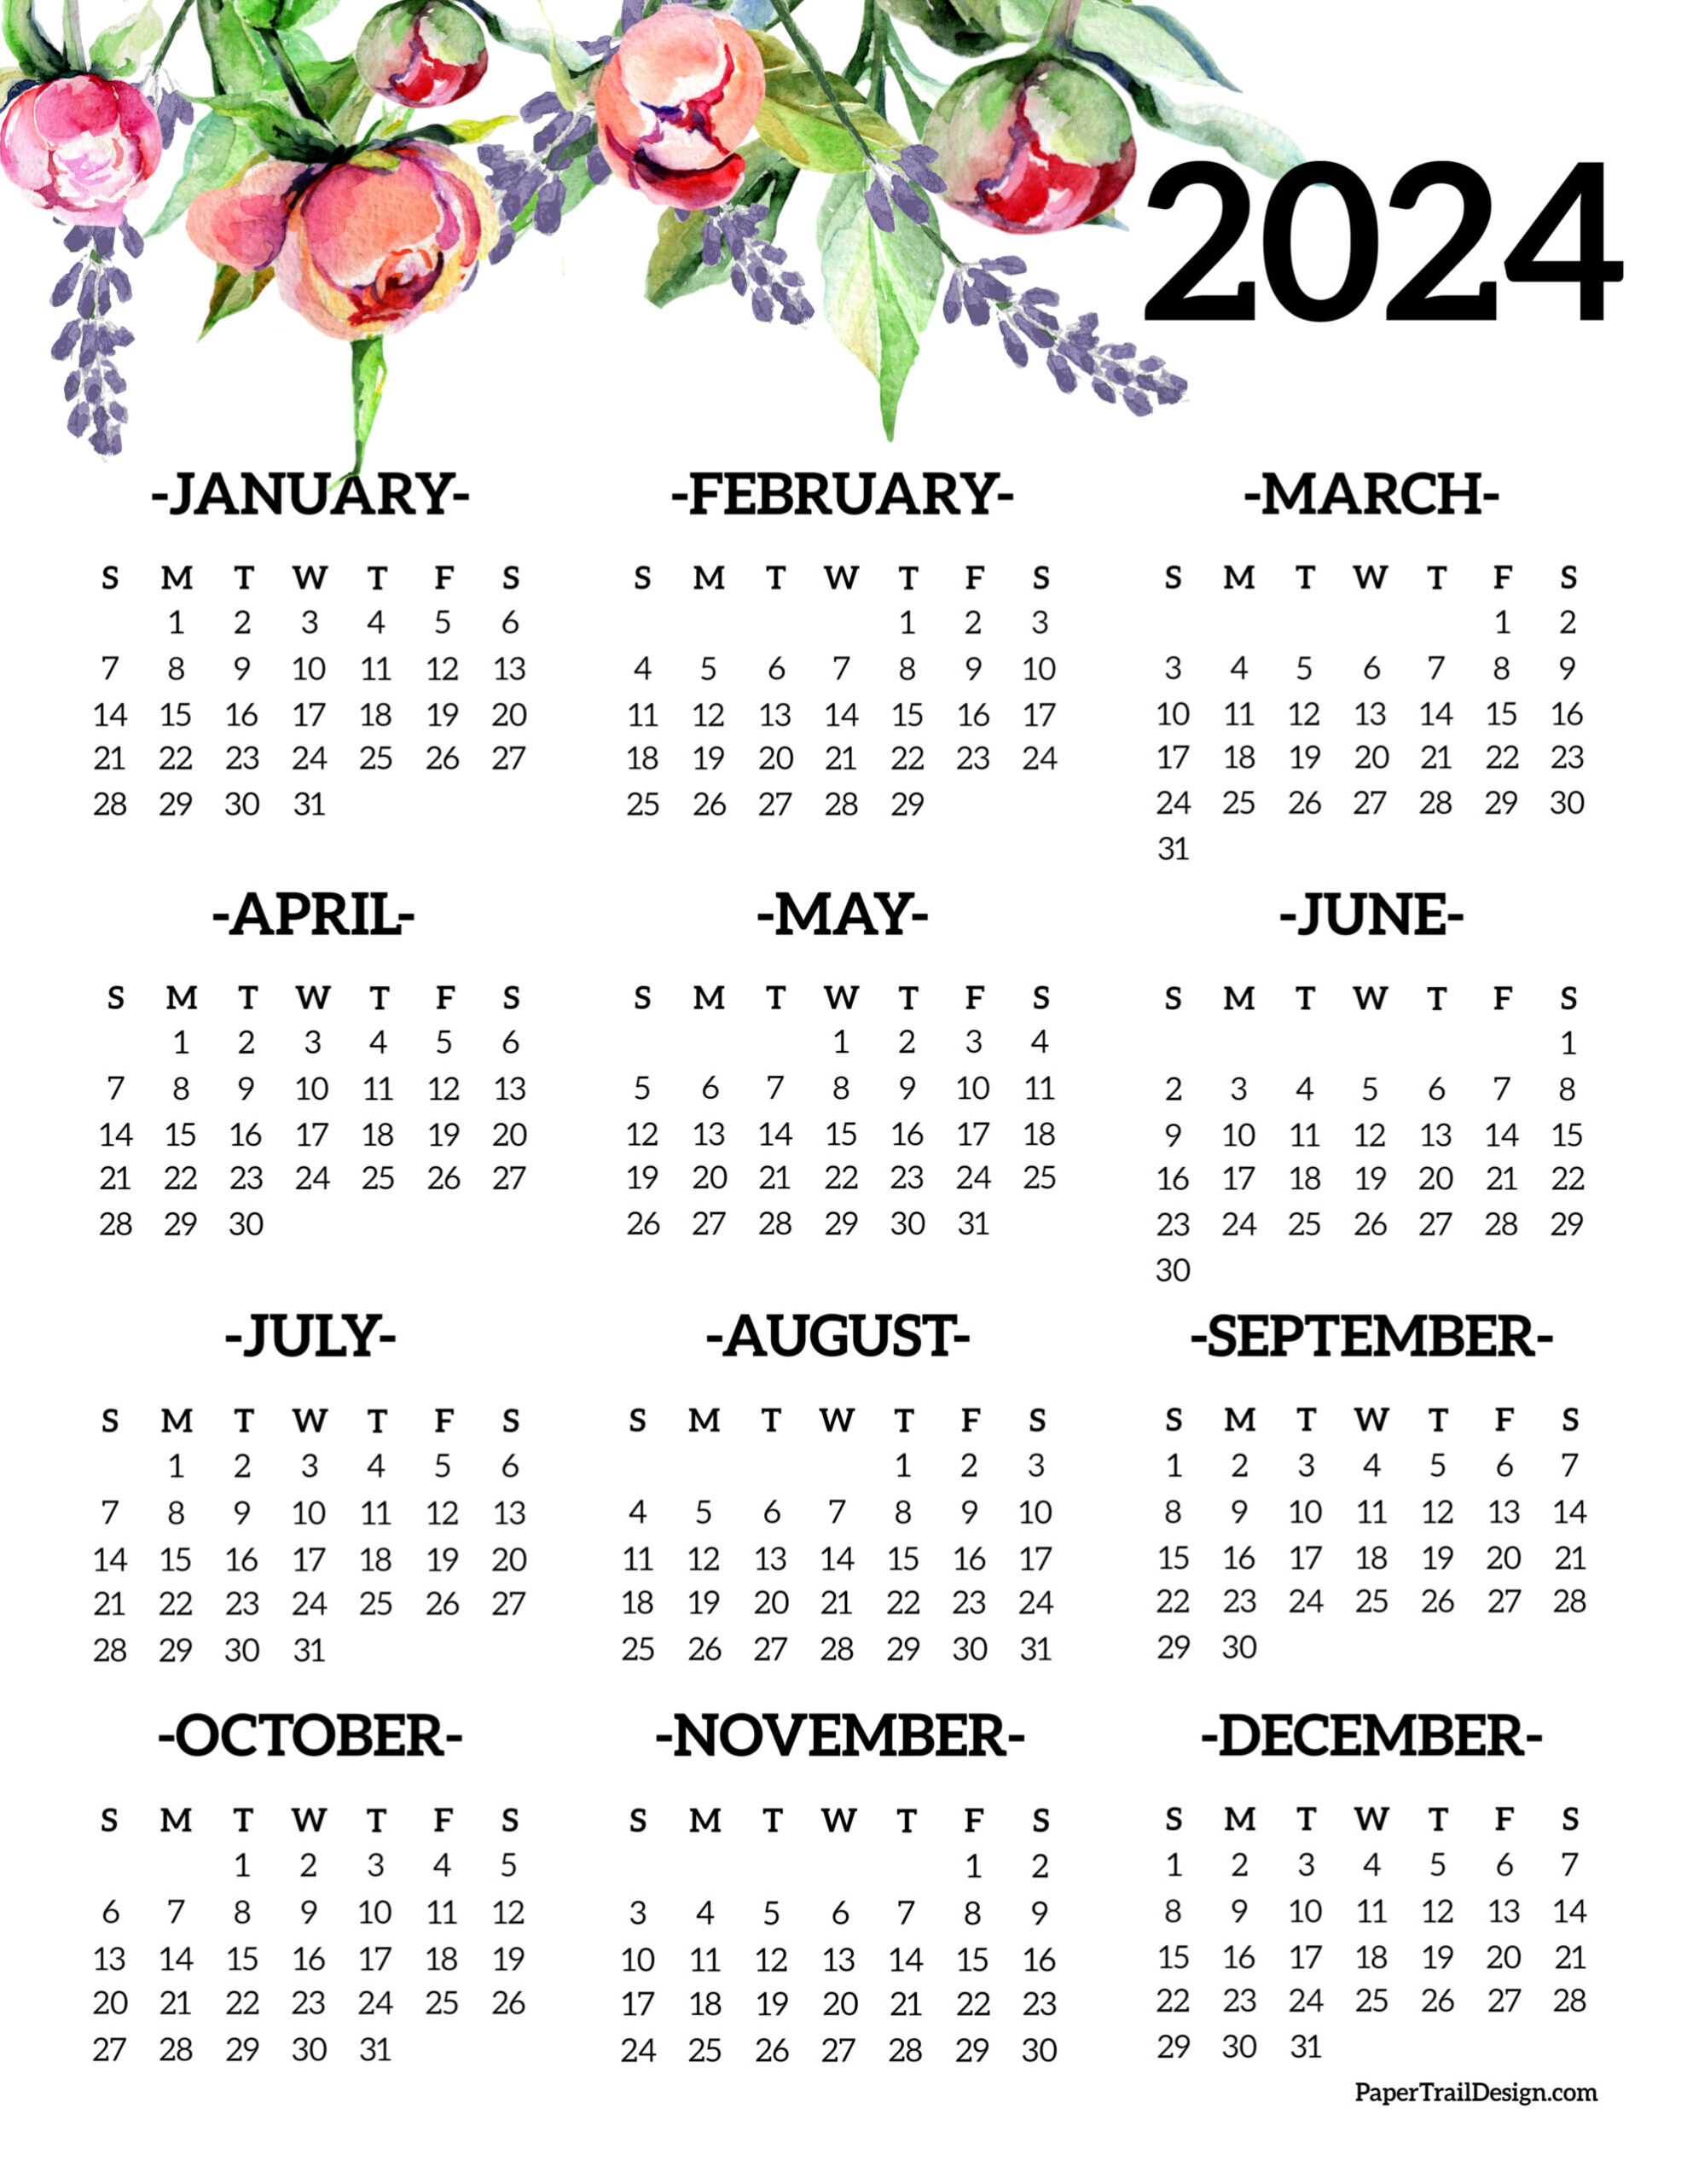 Calendar 2024 Printable One Page - Paper Trail Design for 2024 1 Page Printable Calendar